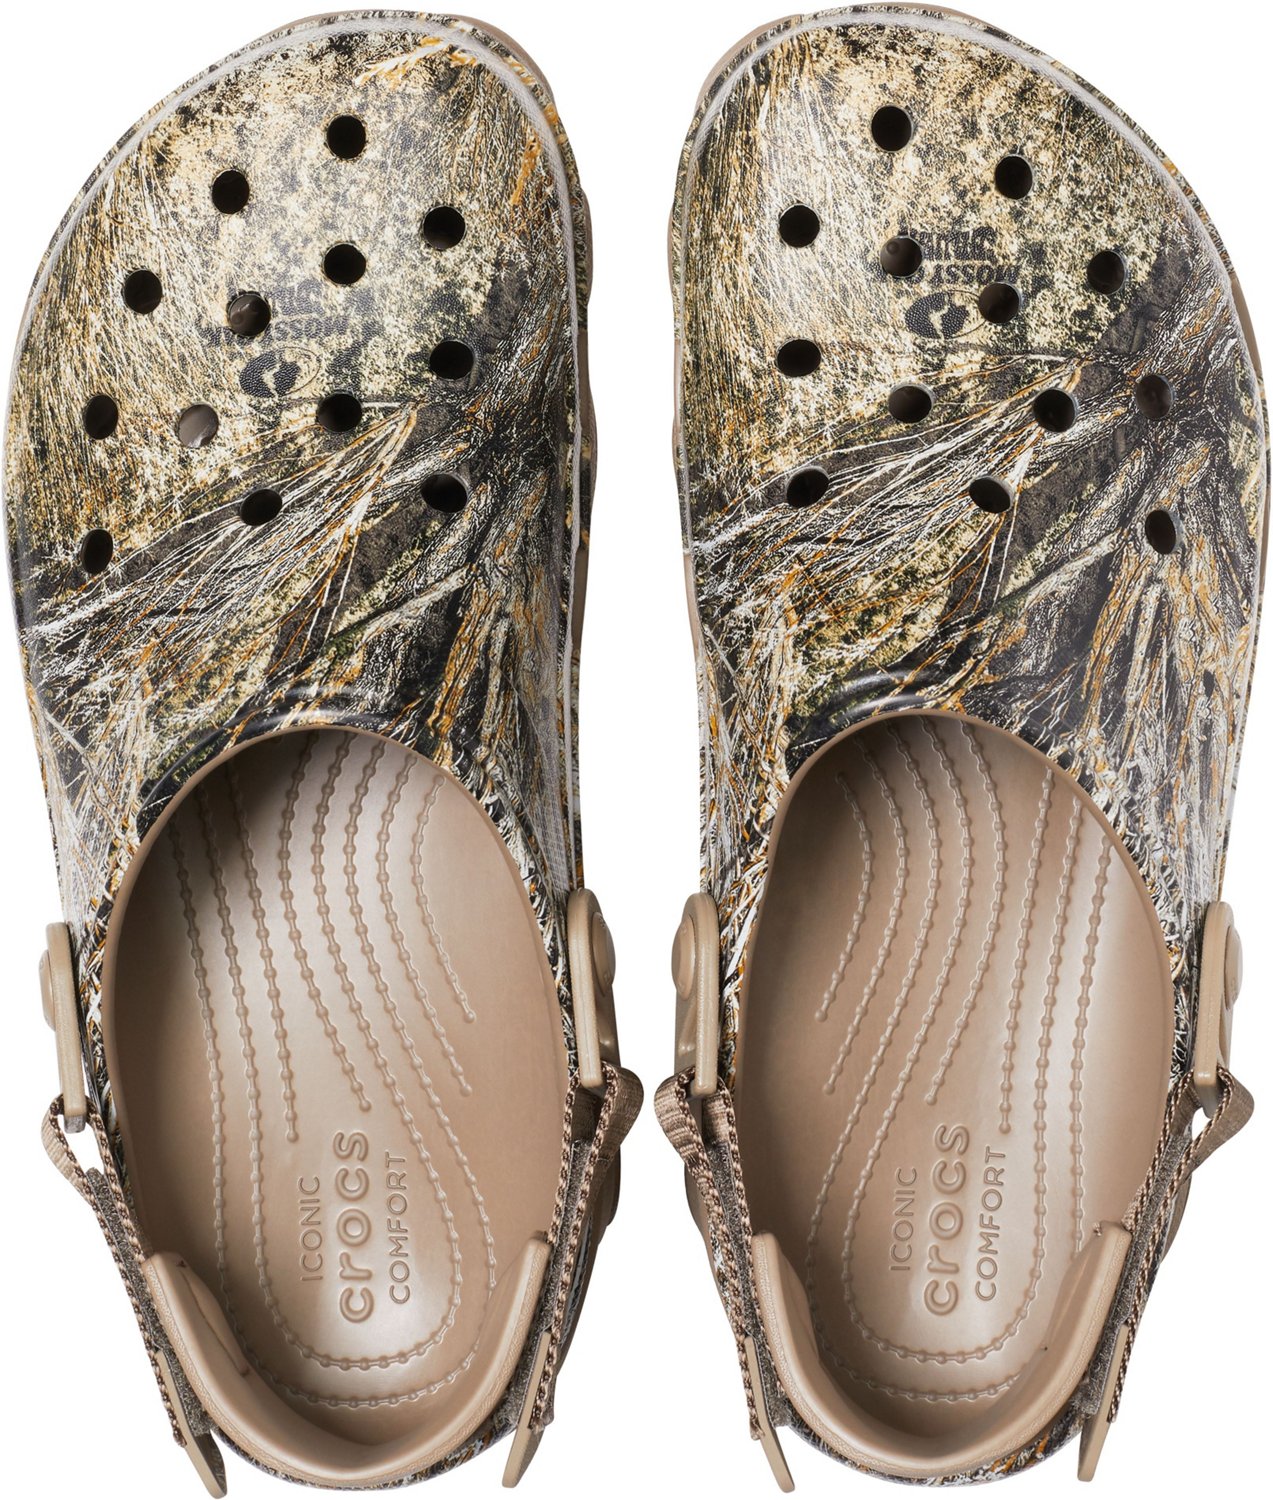 CROCS MOSSY OAK FISHING ONES. Ross find. Whats the big deal about cro